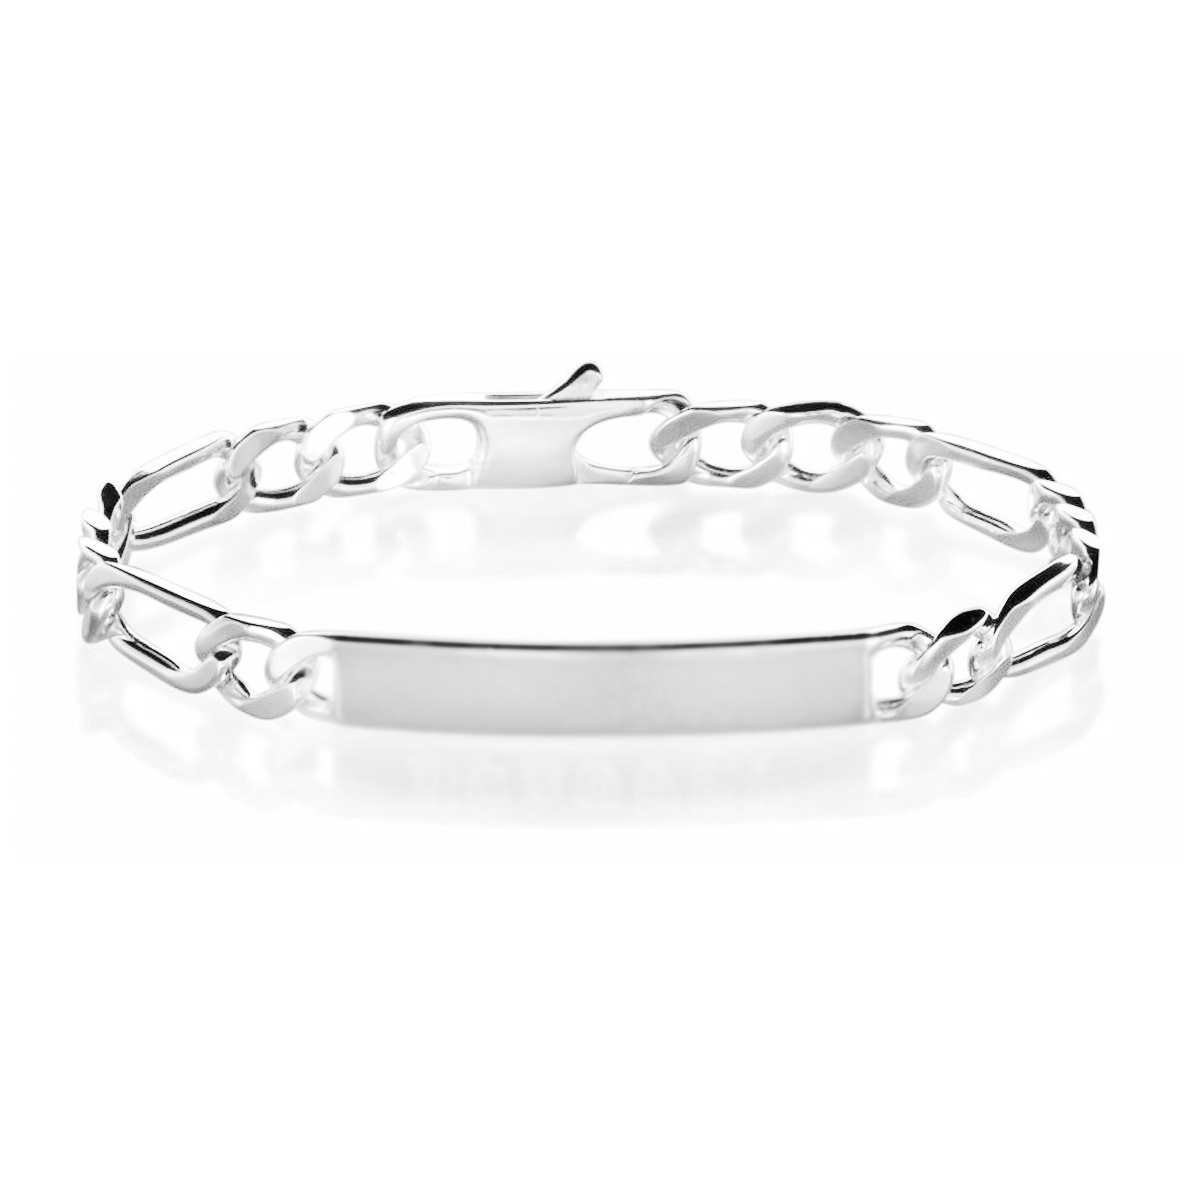 Gourmette femme argent 4 mm maille 1+3 - BETSY